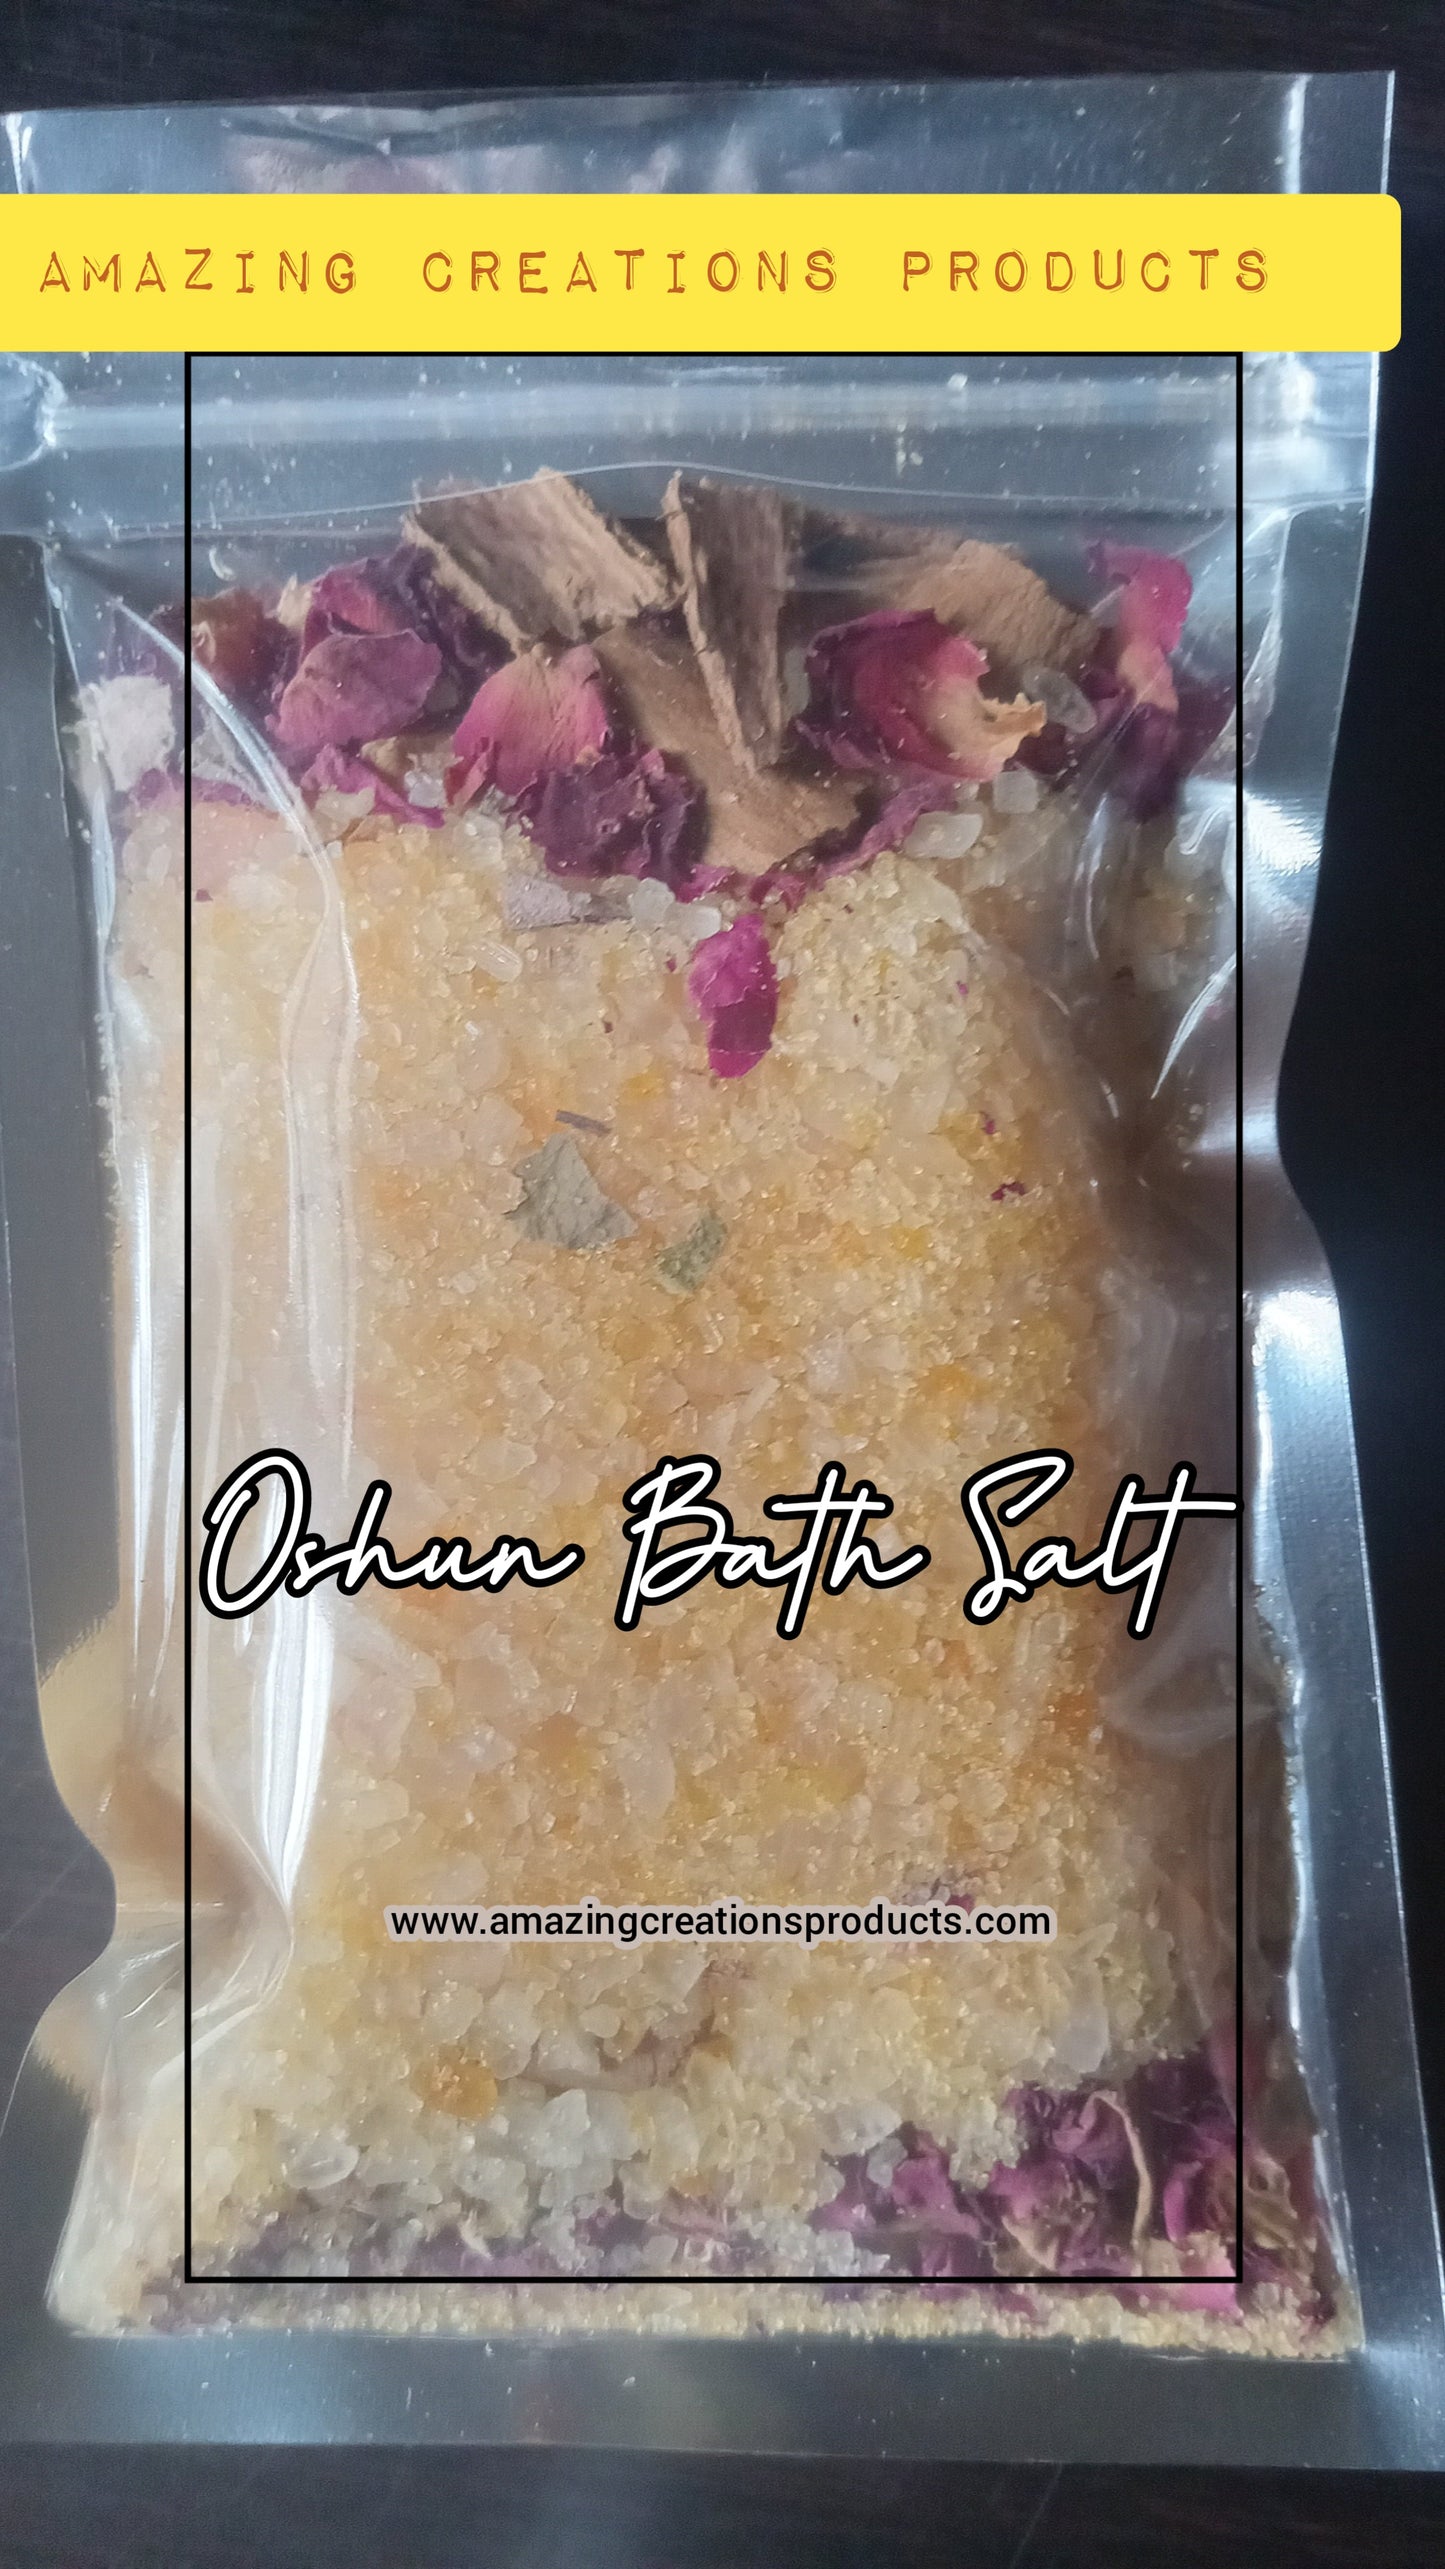  OSHUN Bath Salt -  available at Amazing Creations Products . Grab yours for $15 today!